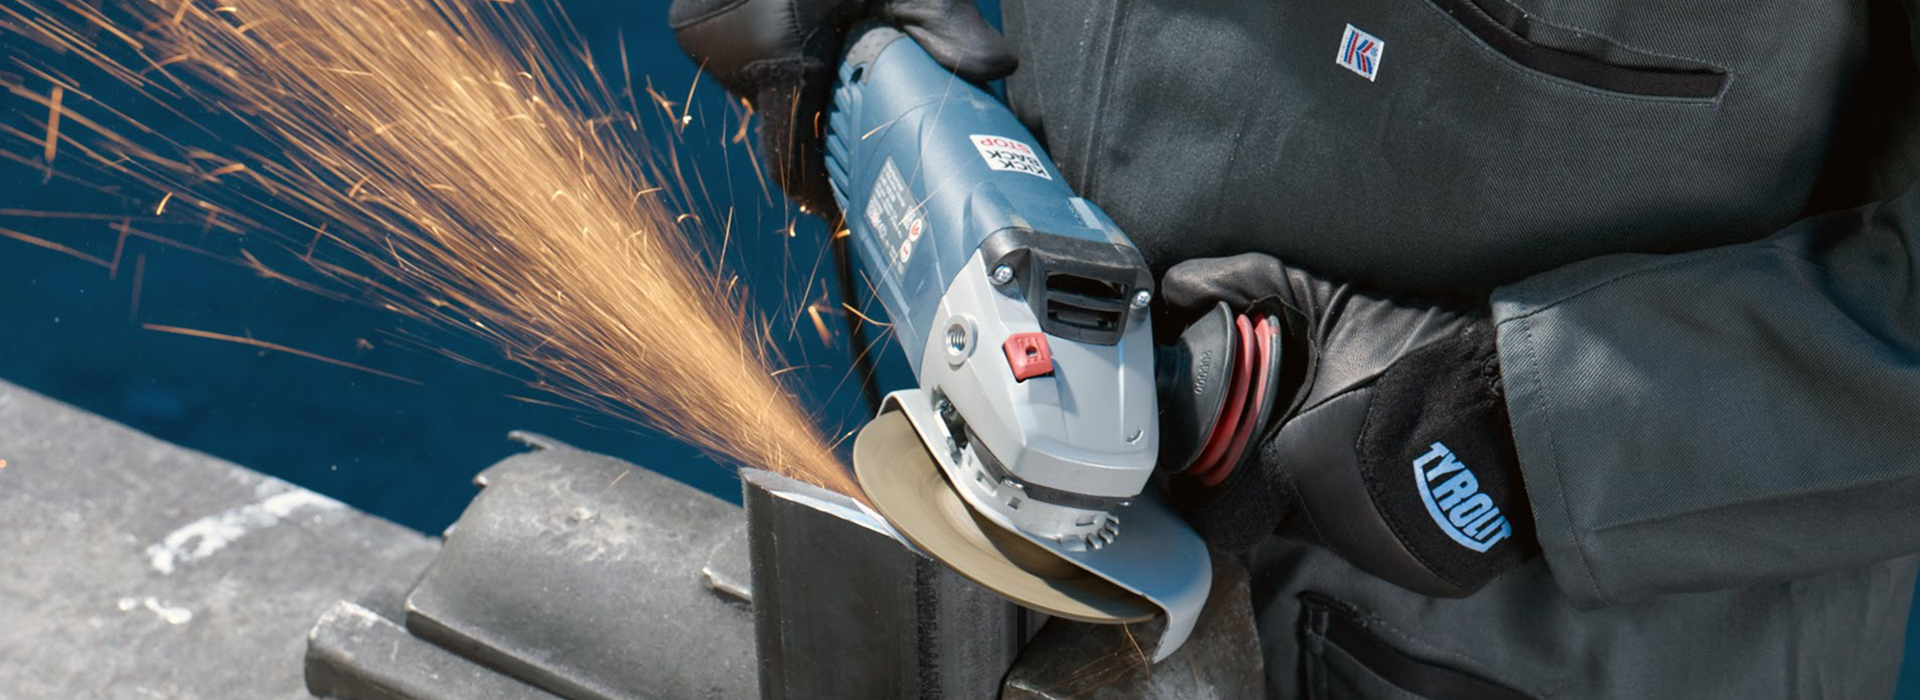 ABRASIVES AND DRILLS